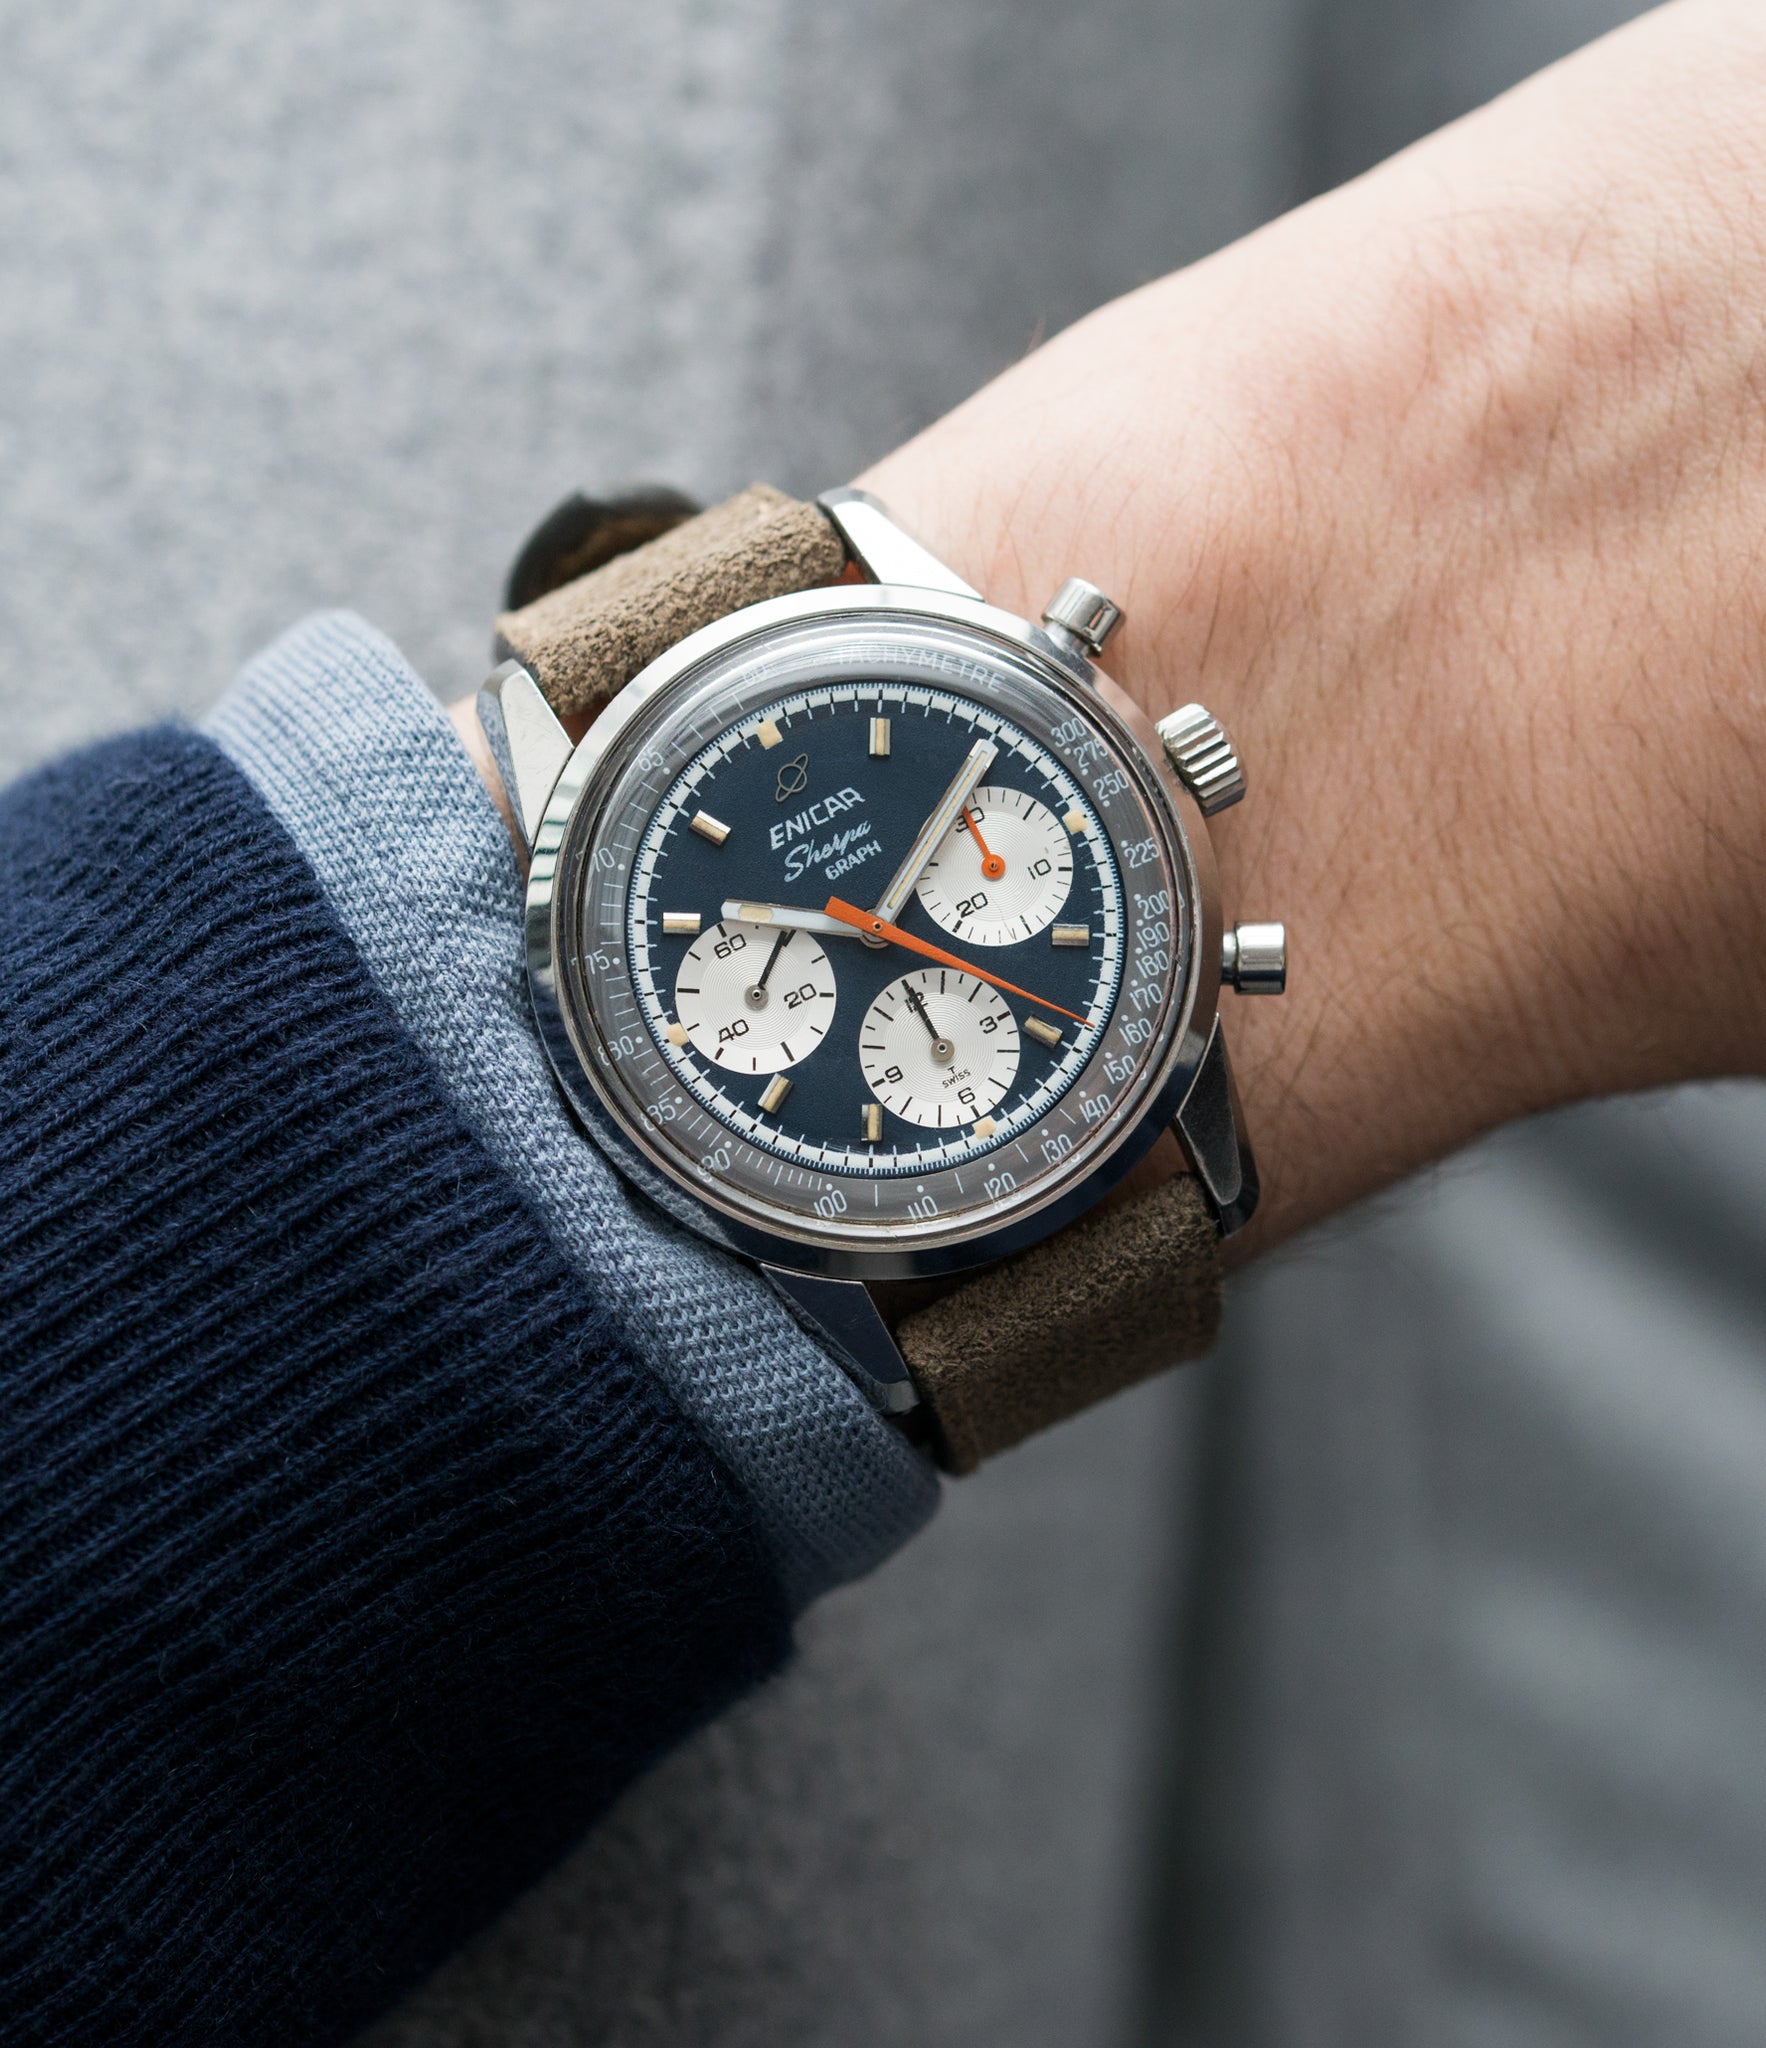 on the wrist Enicar Sherpa Graph 300 Ref. 072-02-01 vintage steel chronograph sport racing watch for sale online at A Collected Man London UK vintage watch specialist